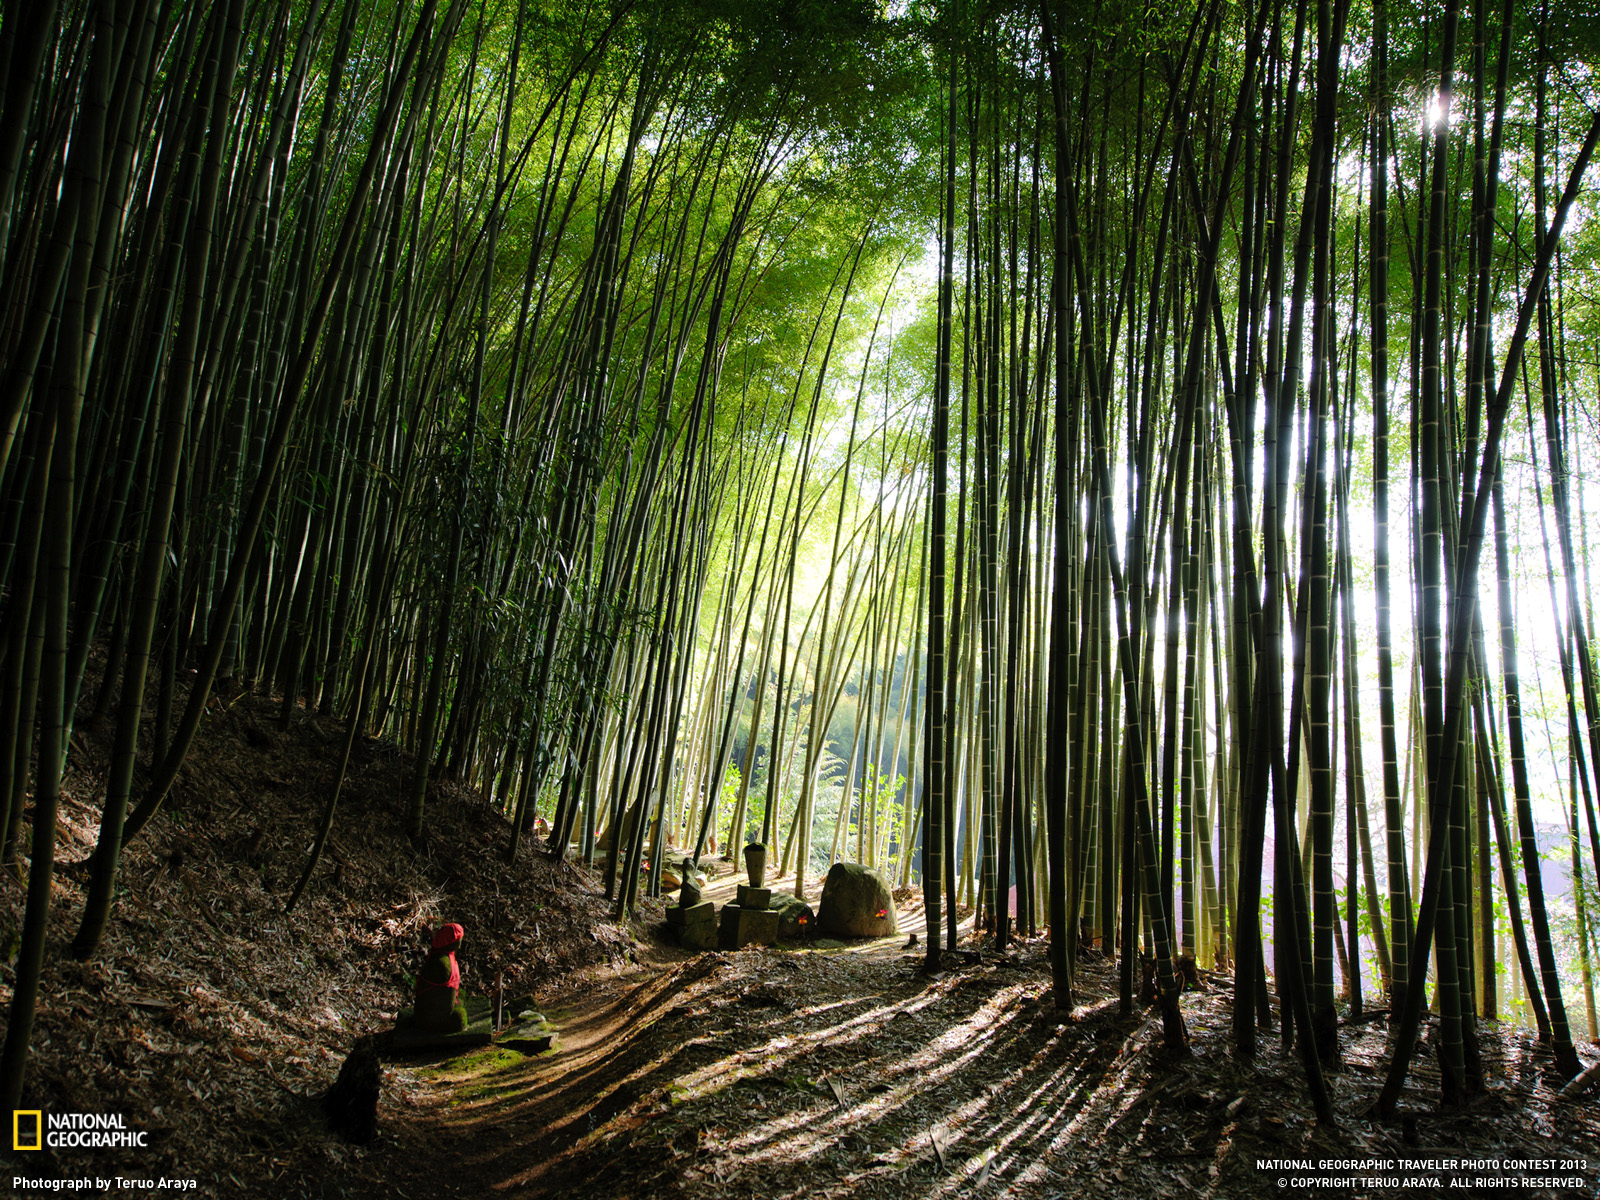 Bamboo Picture Japan Wallpaper National Geographic Photo Of The